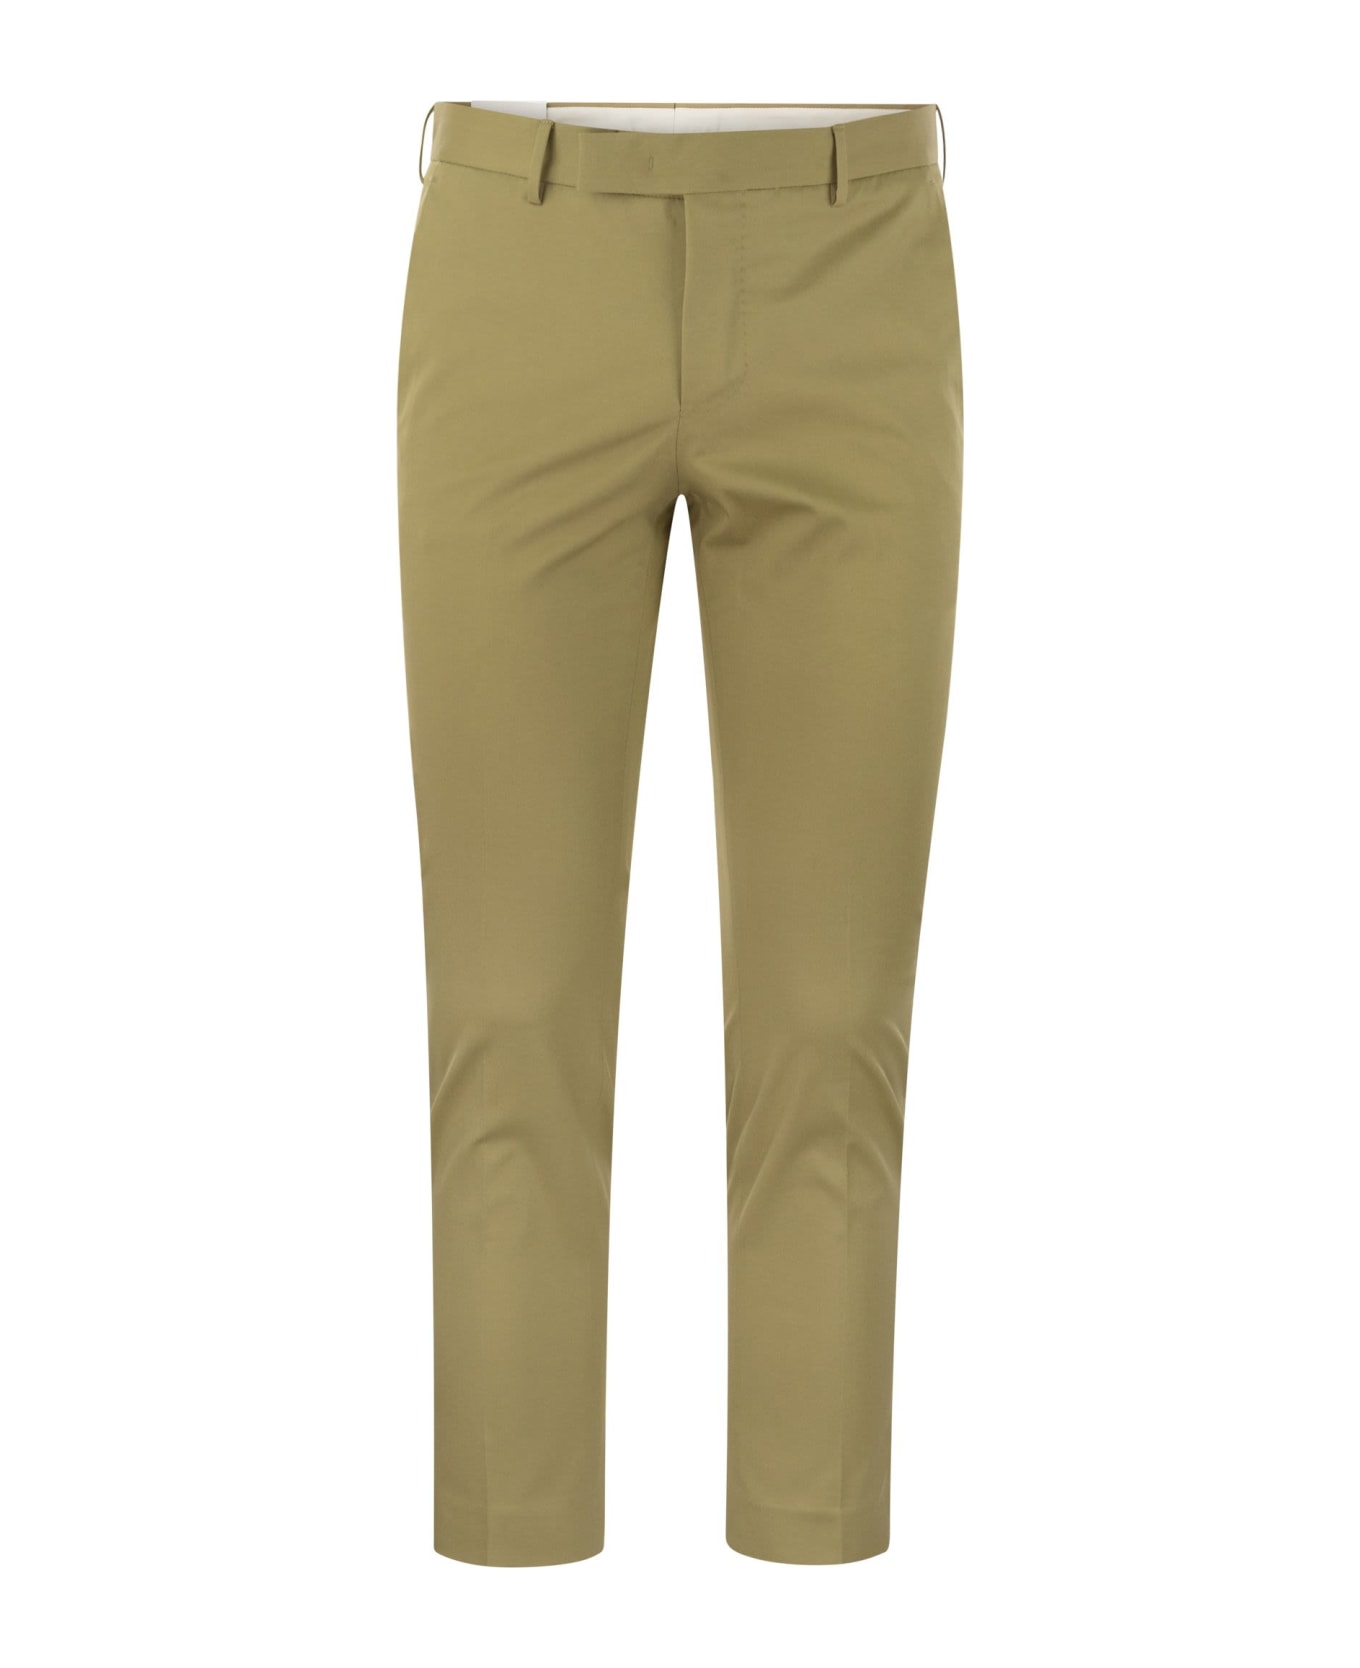 PT Torino Dieci - Cotton Trousers - Rope